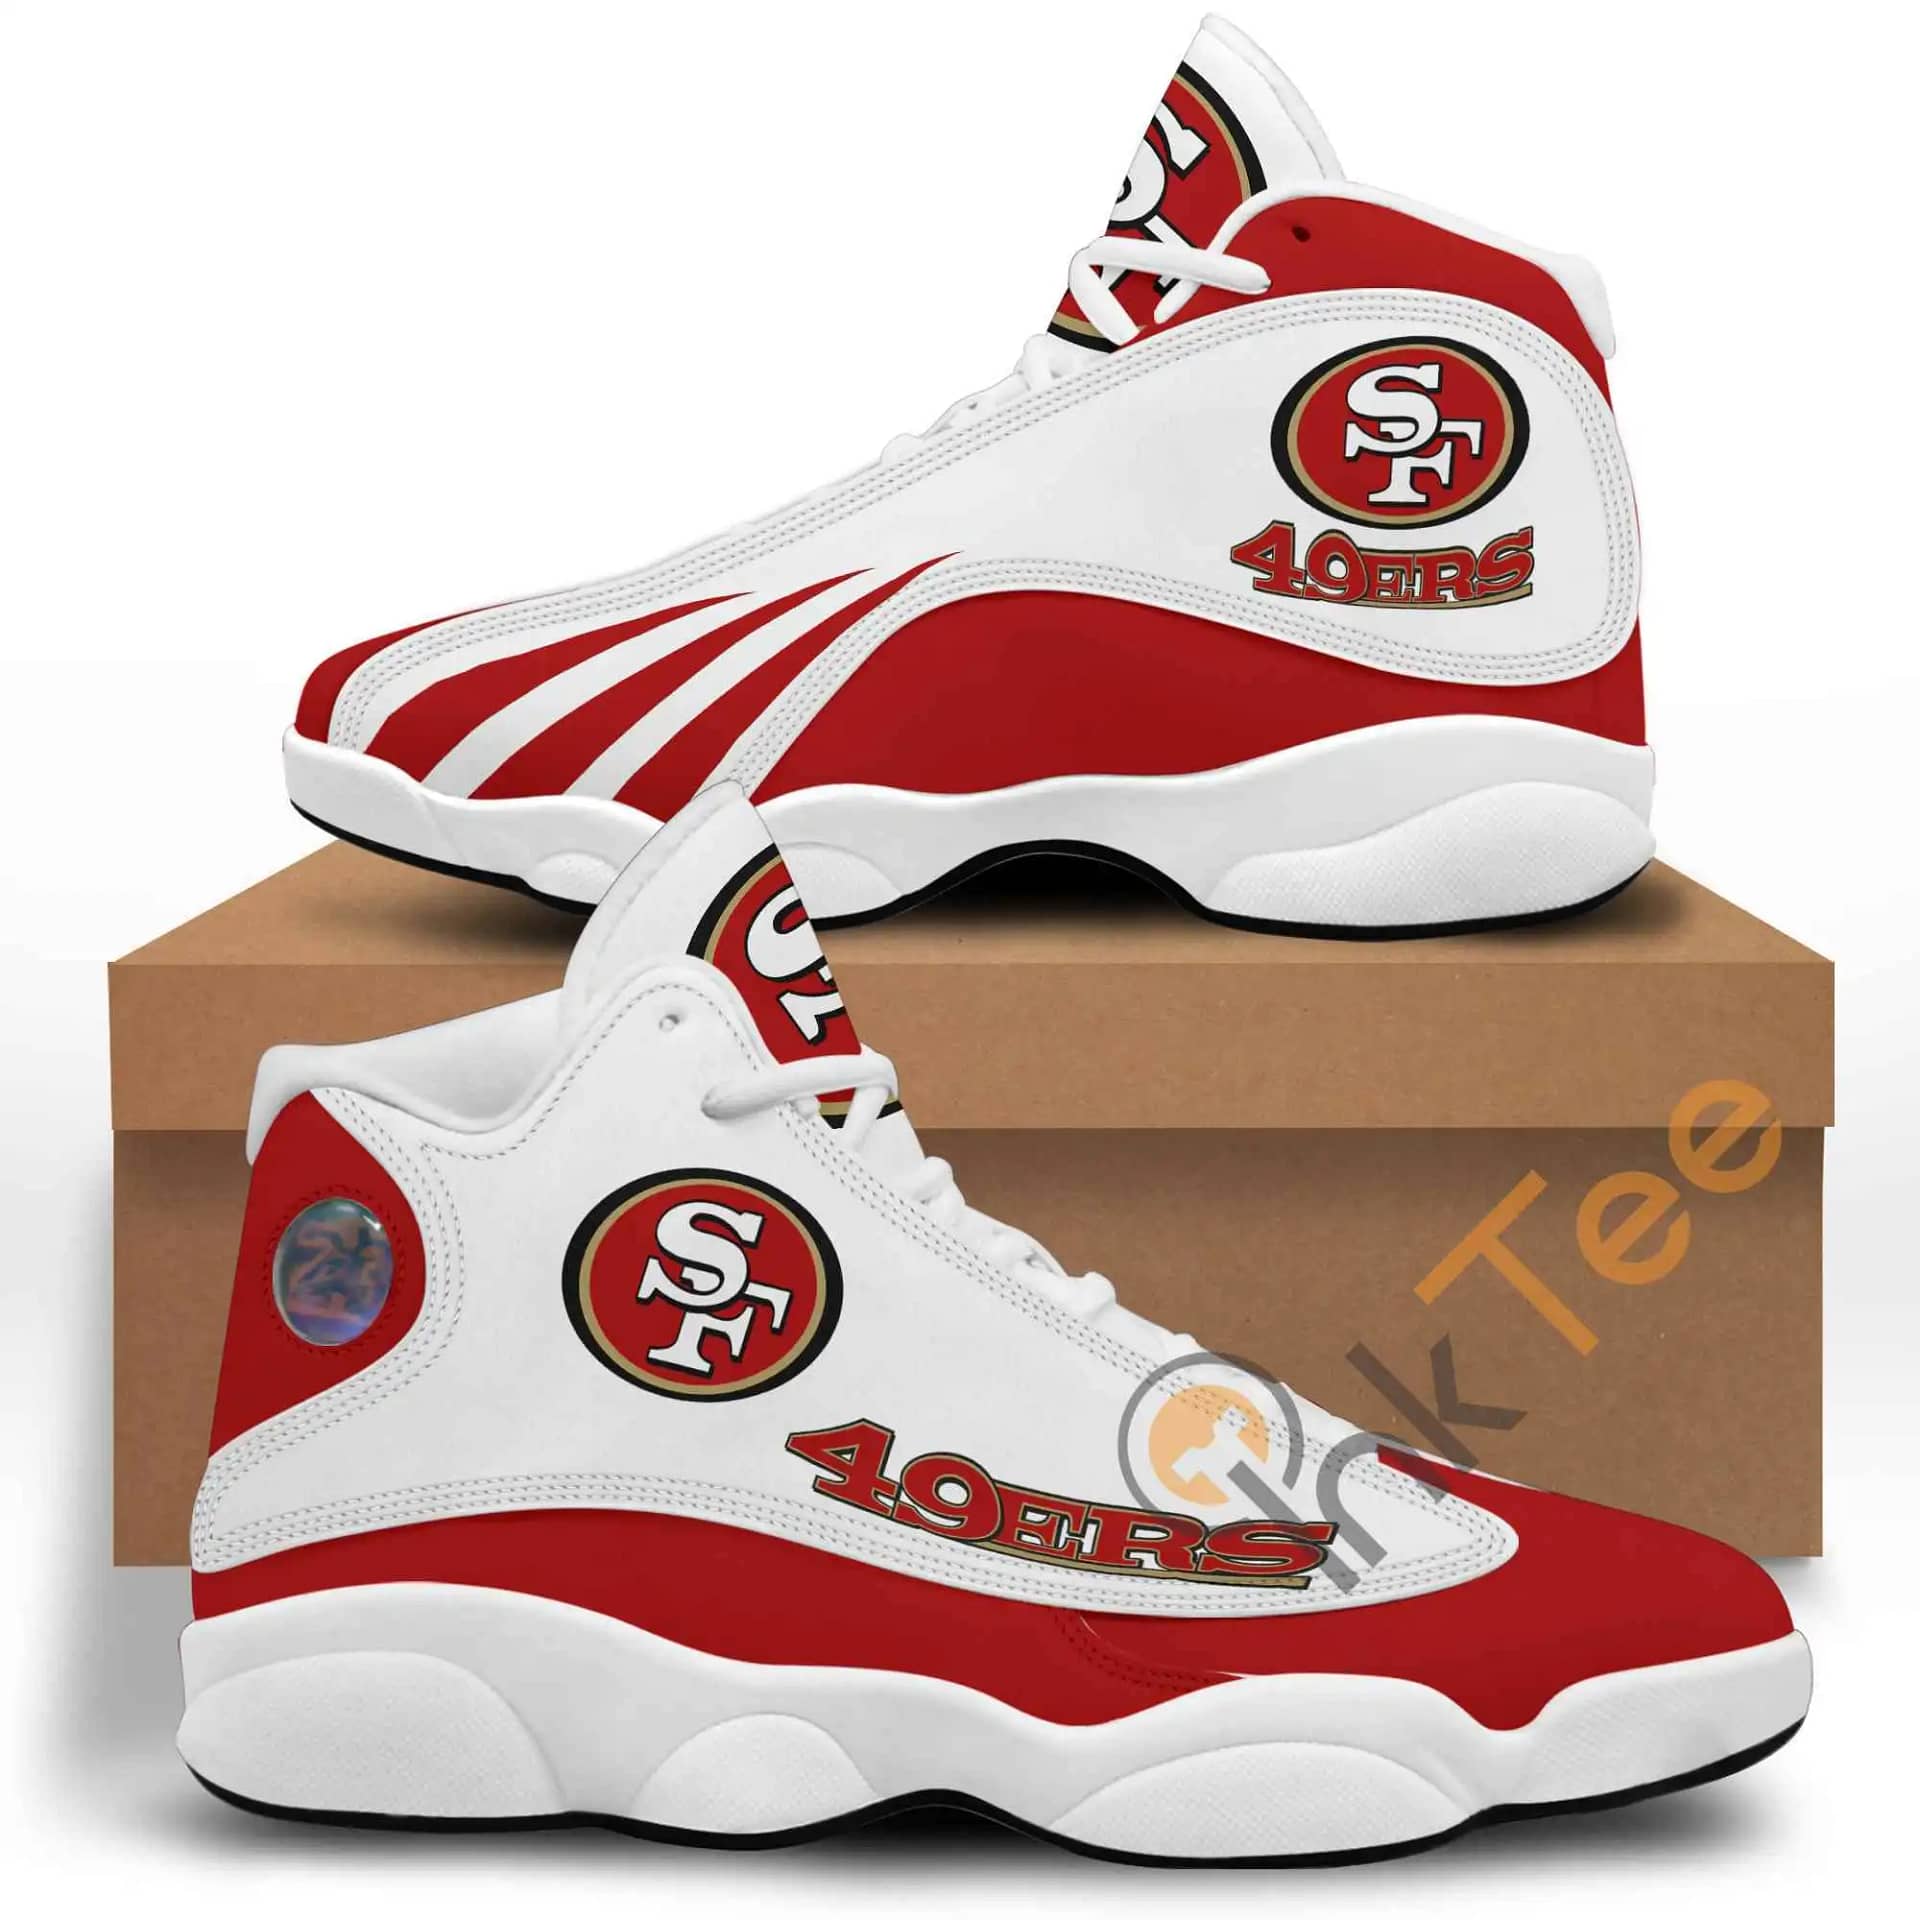 Nfl San Francisco 49ers Red Air Jordan 13s Customized Shoes - Inktee Store